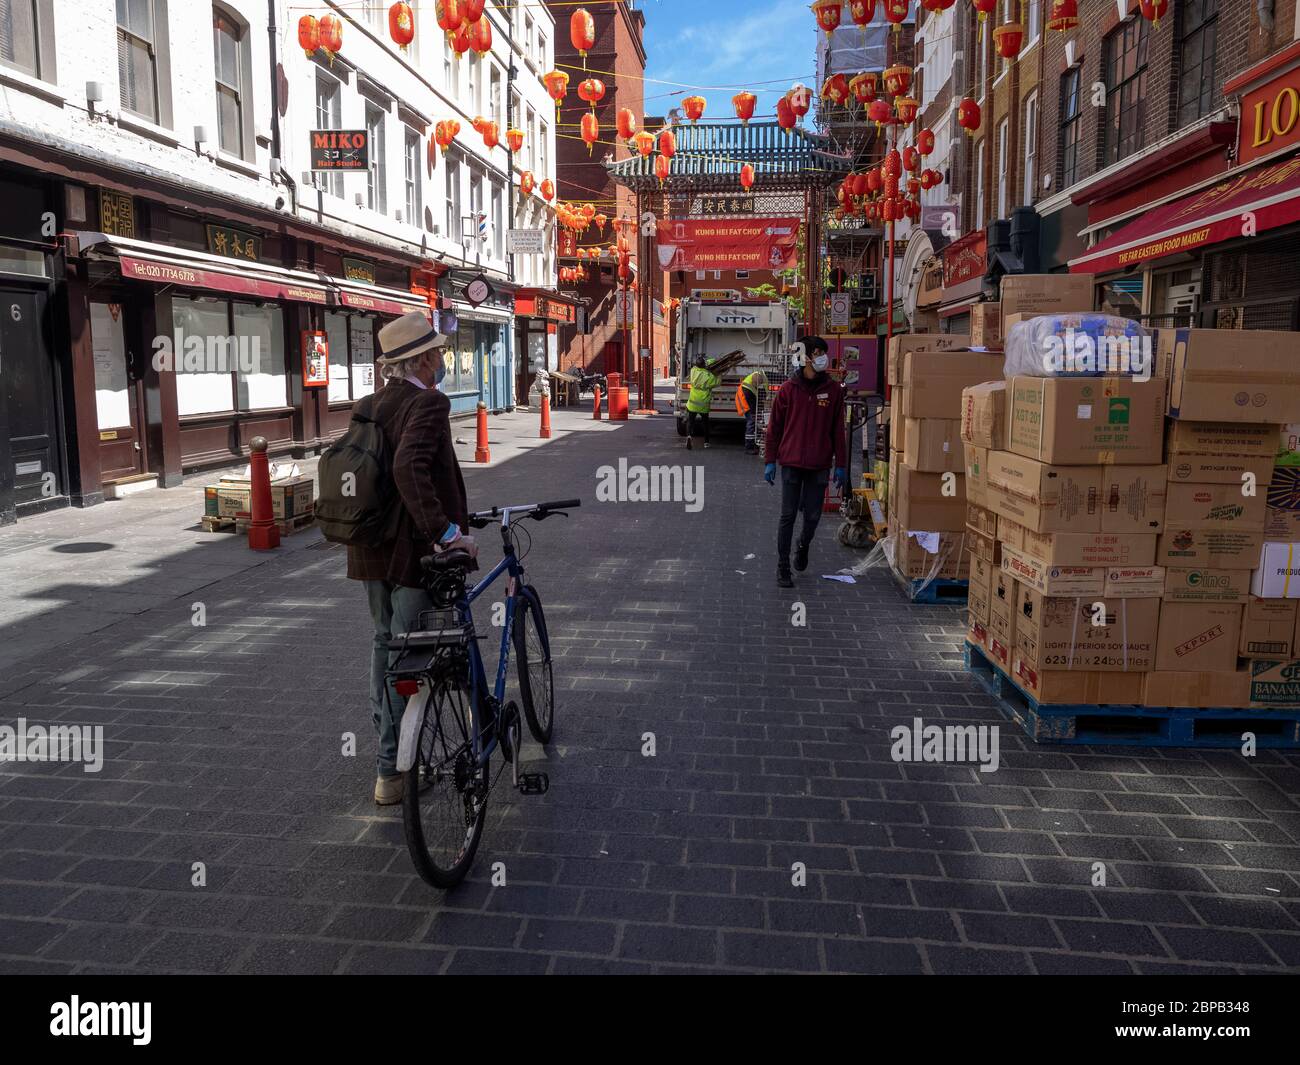 London. UK. May the 18th 2020 at noon. Wiew of Essential Workers in China Town. Stock Photo